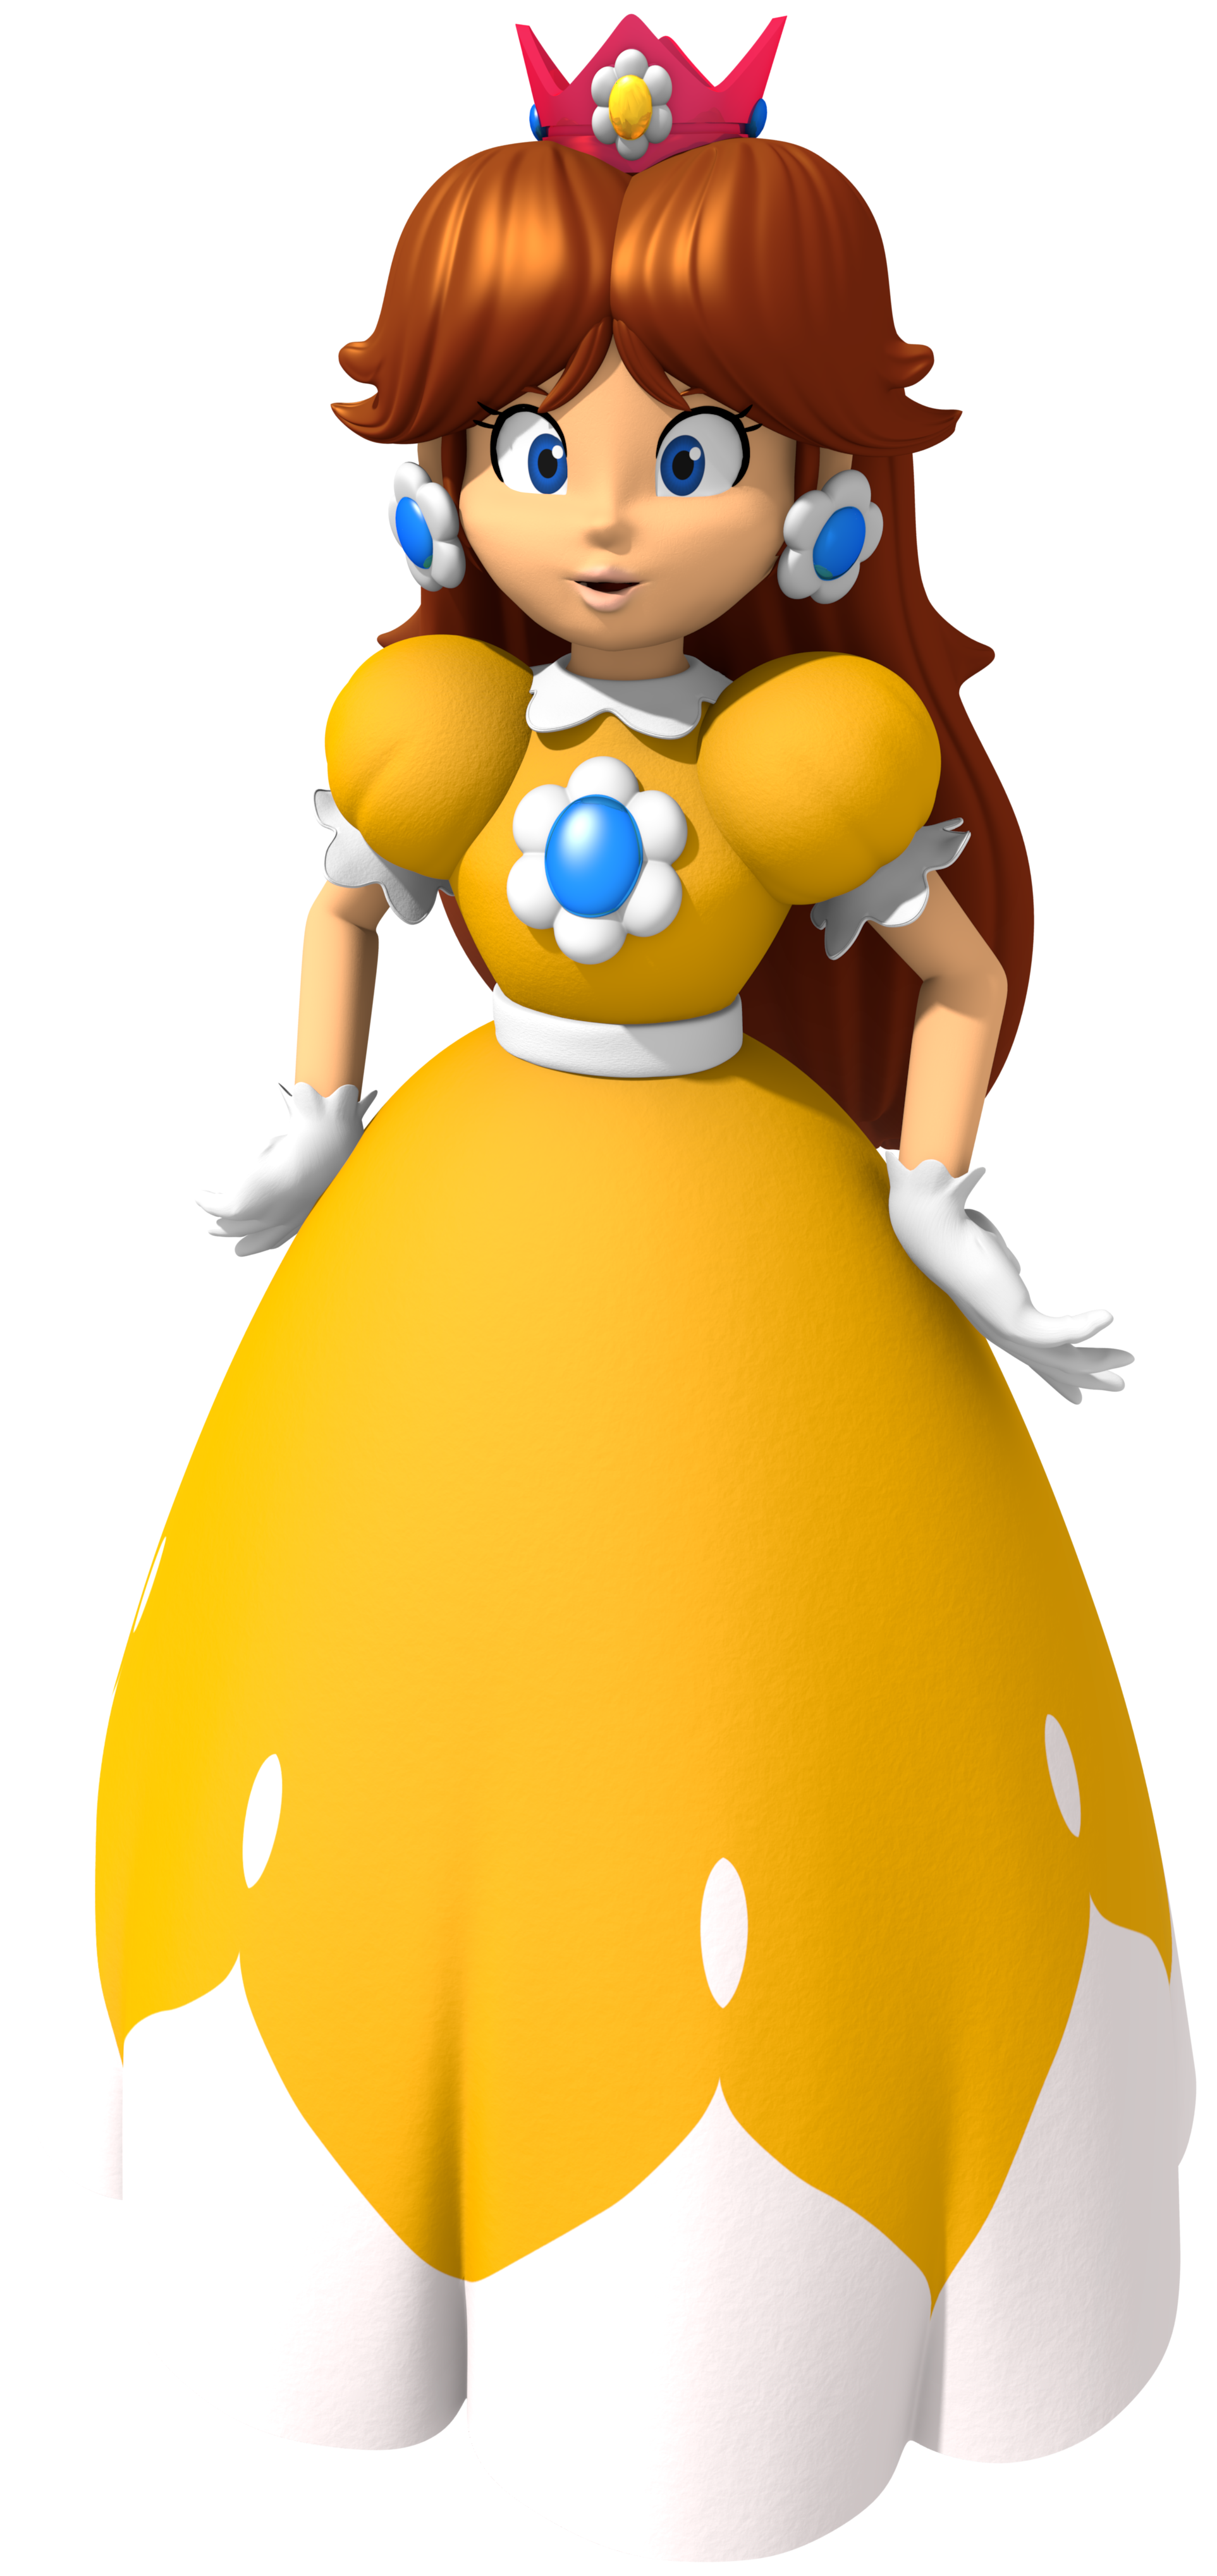 Image result for classic daisy